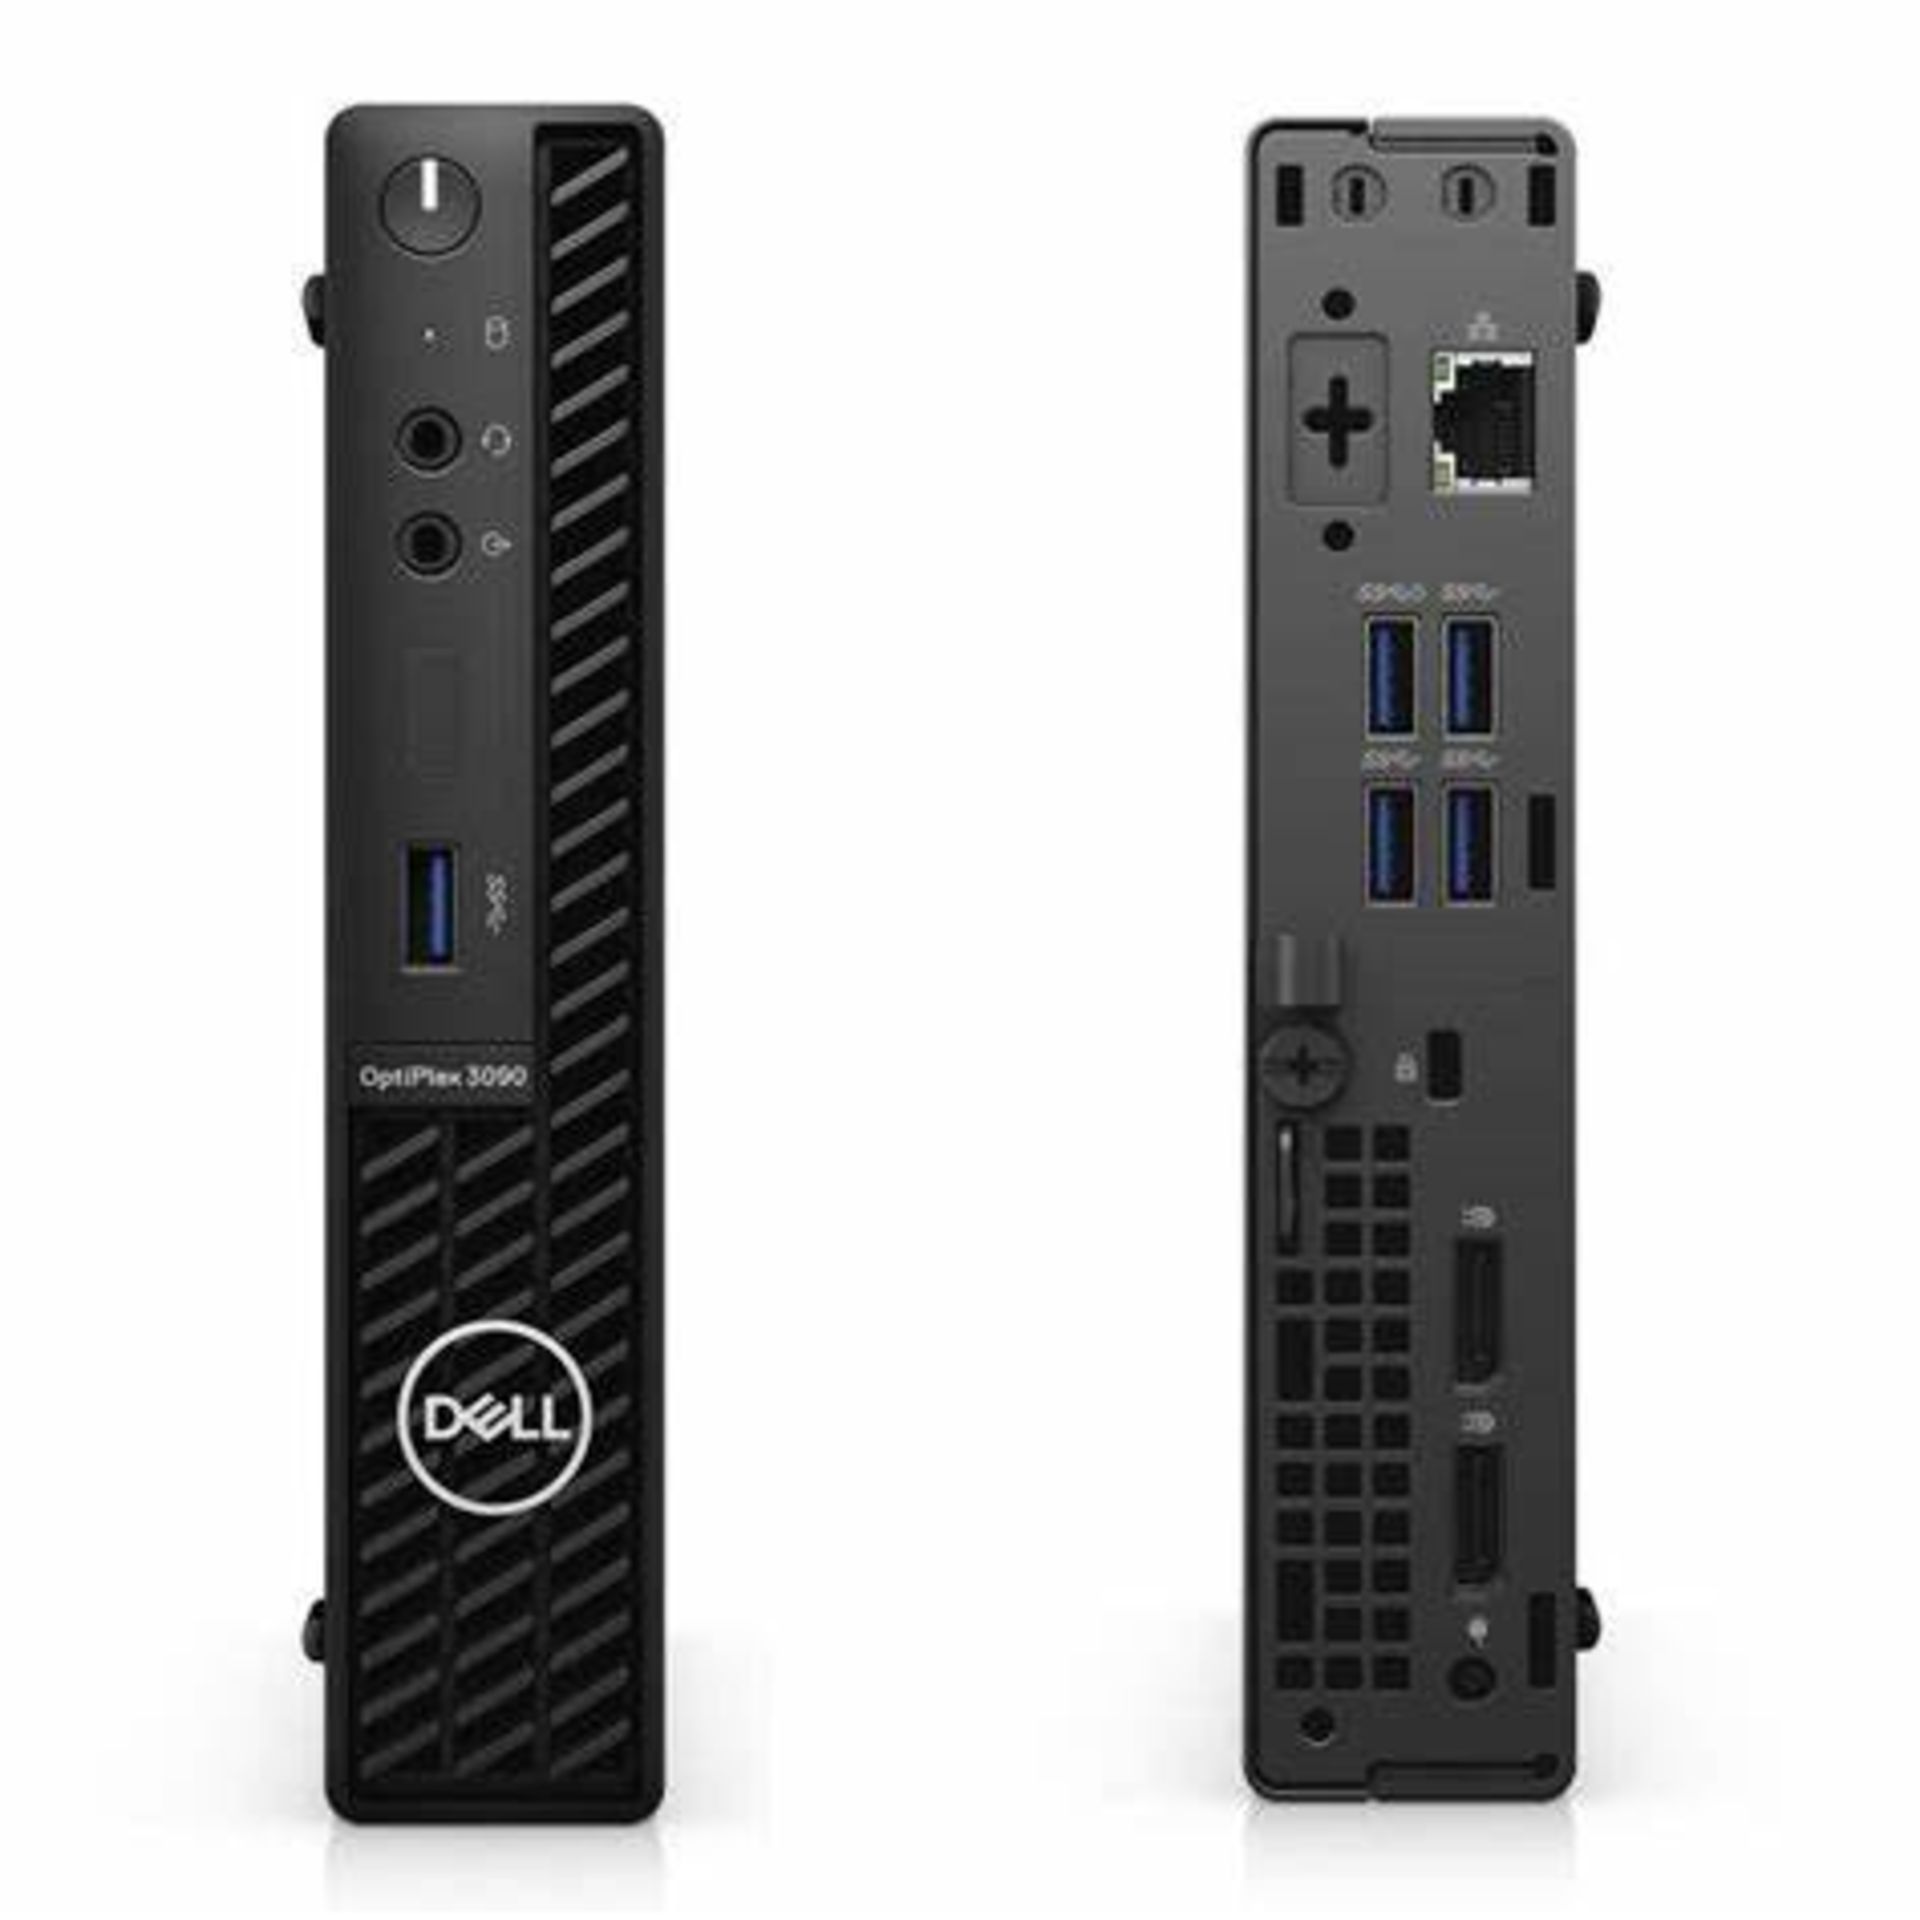 DELL OPTIPLEX 3090 USFF PC WITH INTEL I3-10105T CPU, 8GB RAM, 256GB SSD, POWER ADAPTER & DP TO VGA - Image 2 of 4